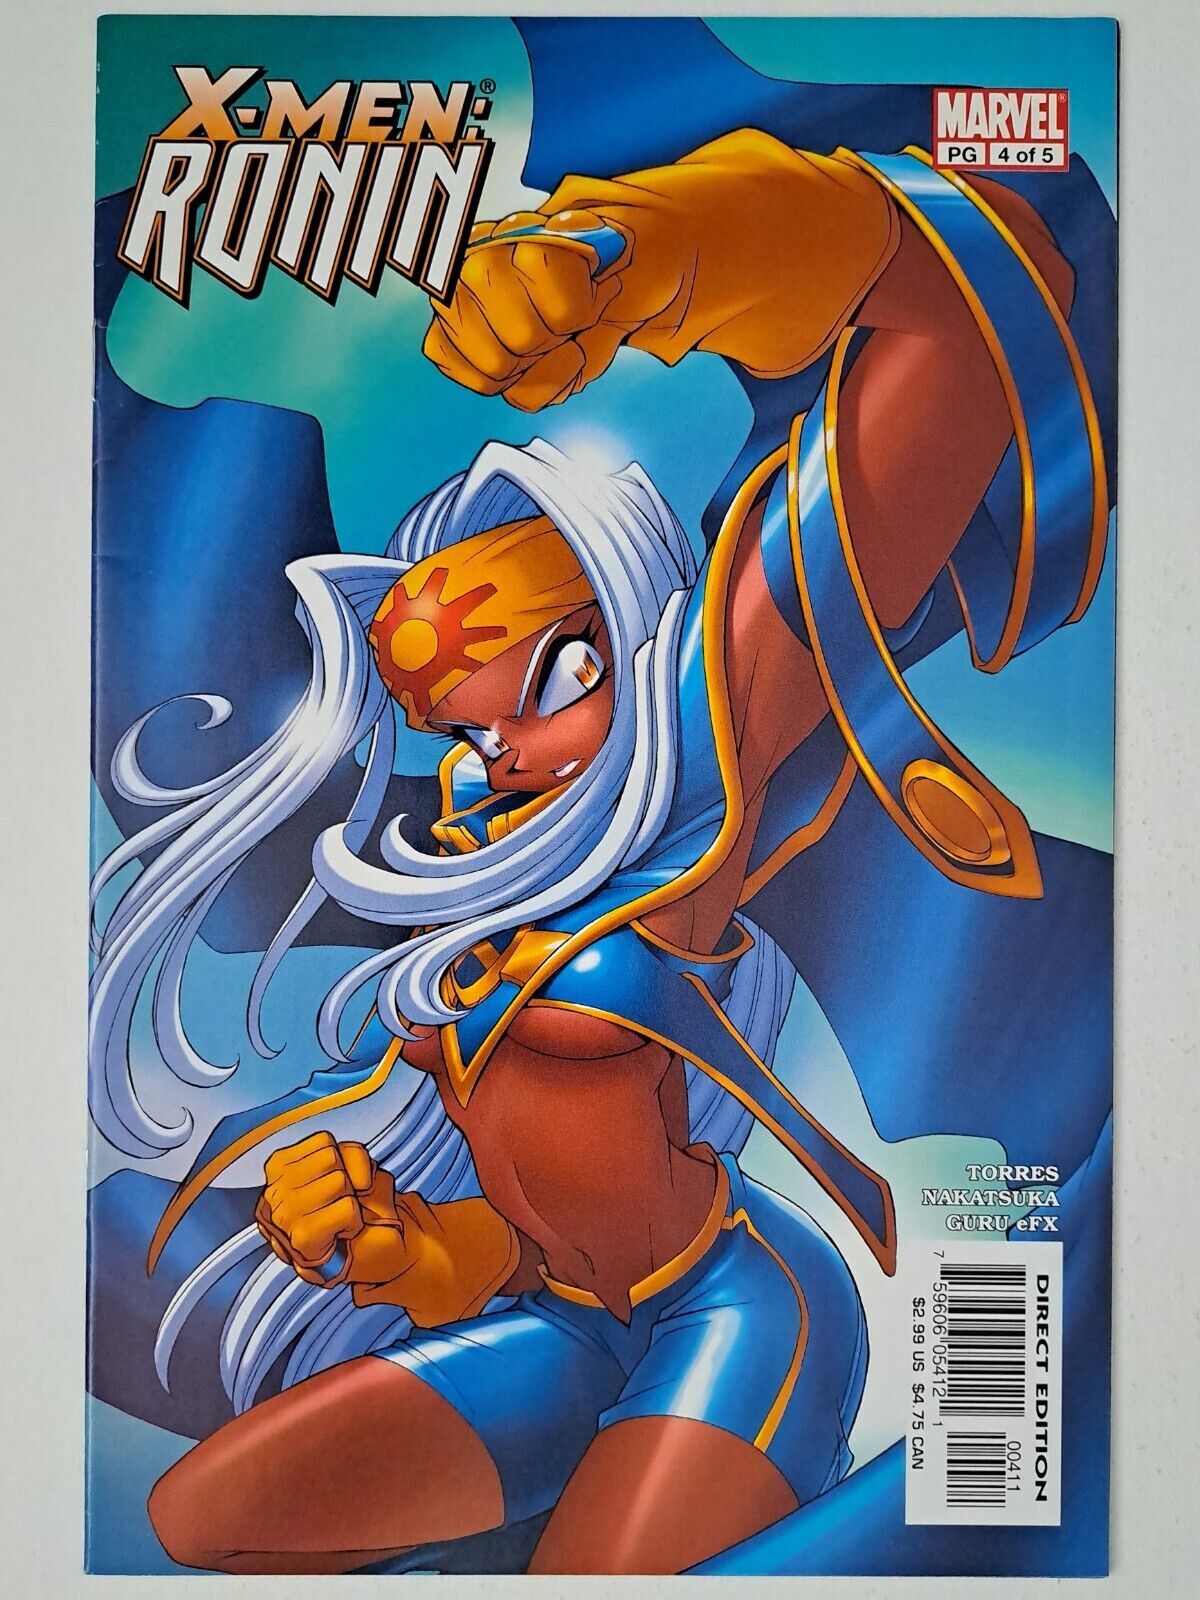 X-Men Ronin #4 Of 5 - Anime Style Miniseries - Combined Shipping + Great Pics